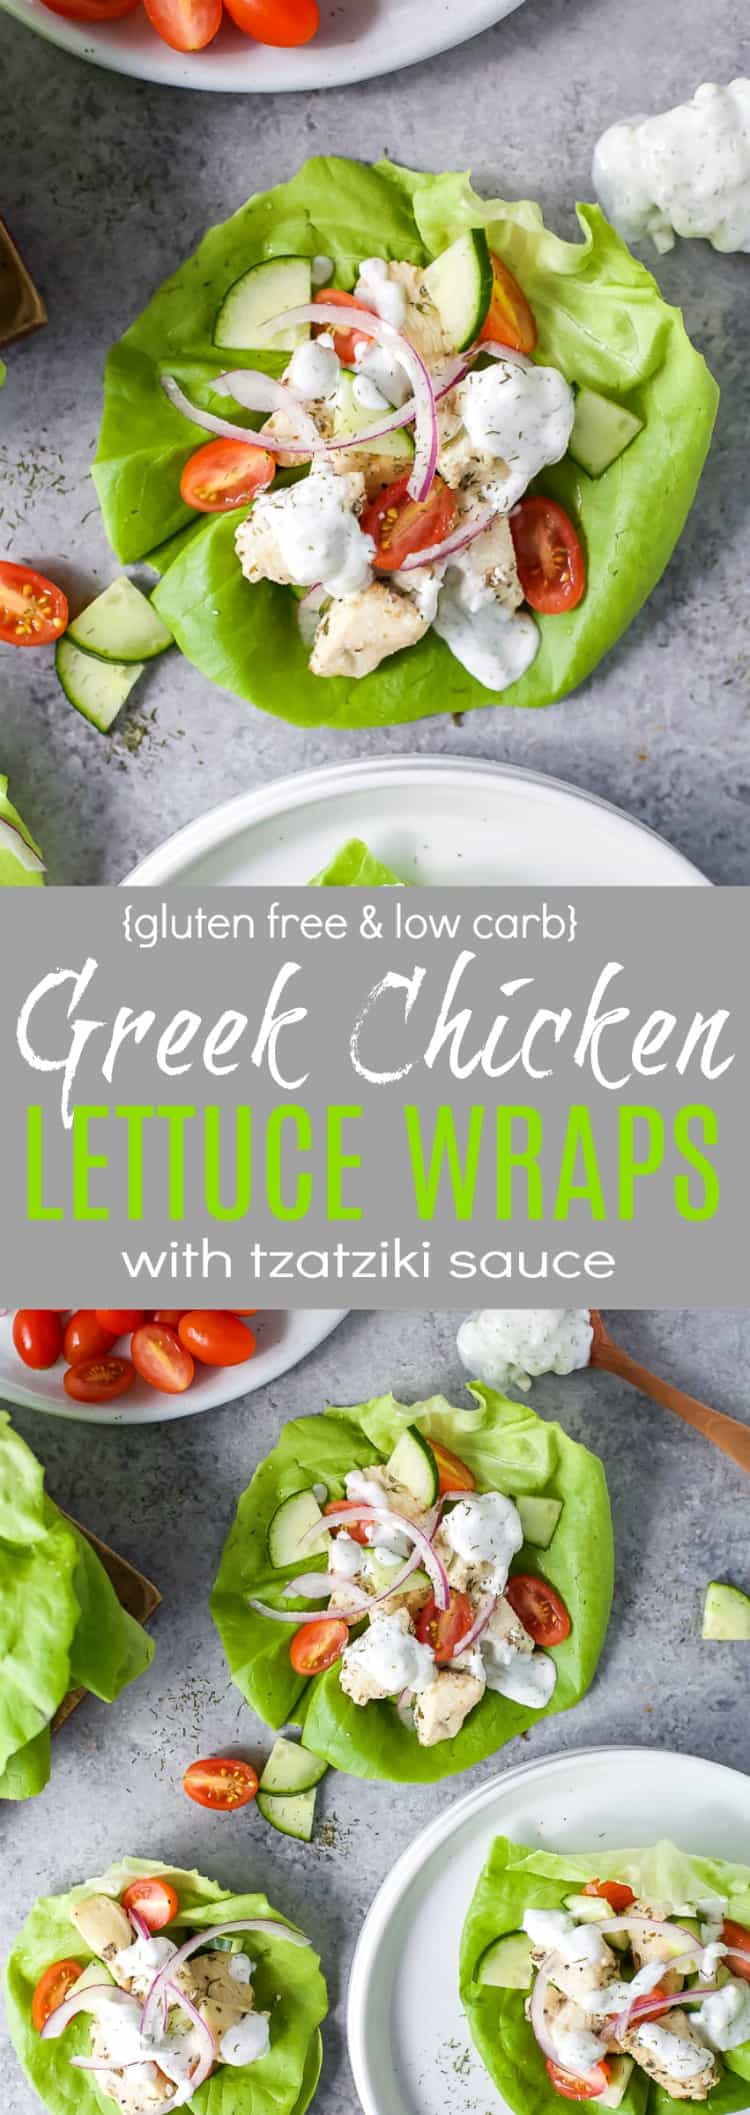 Recipe collage for Greek Chicken Lettuce Wraps with Tzatziki Sauce